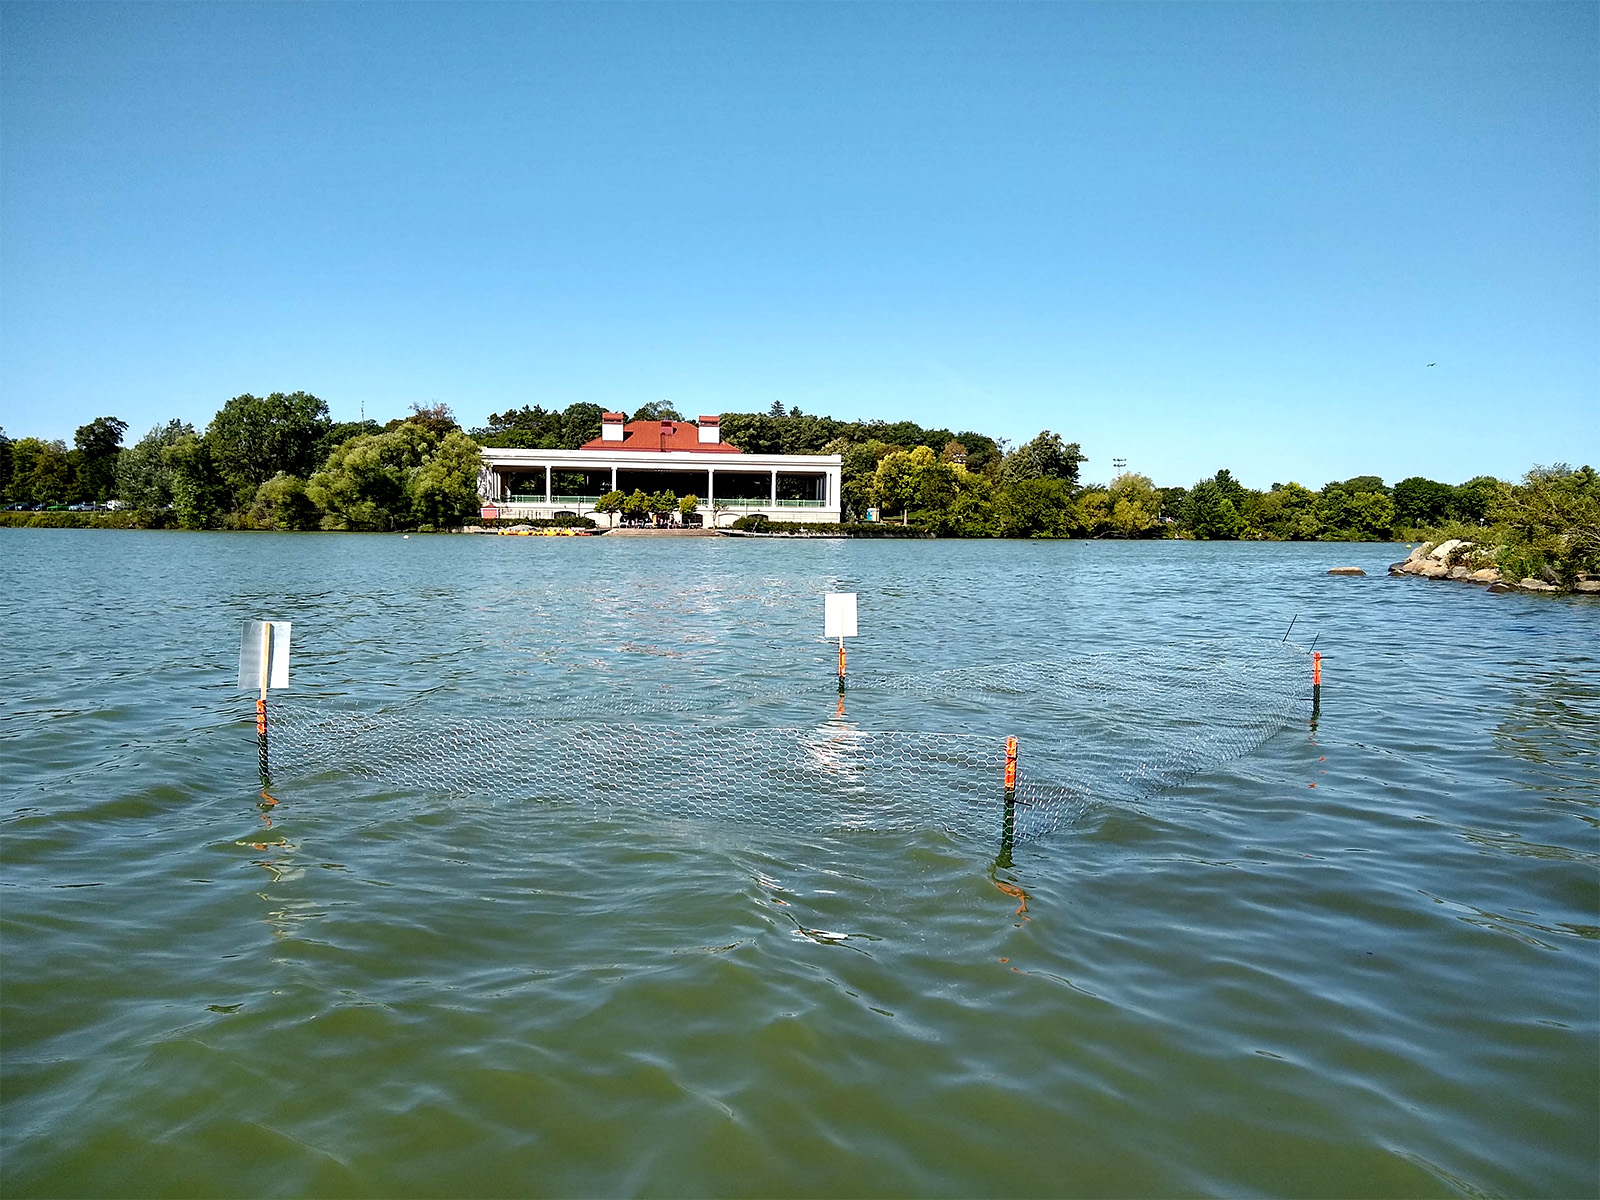 An enclosure with four metal posts and rabbit wire fencing in Como Lake with the Pavilion in the background.